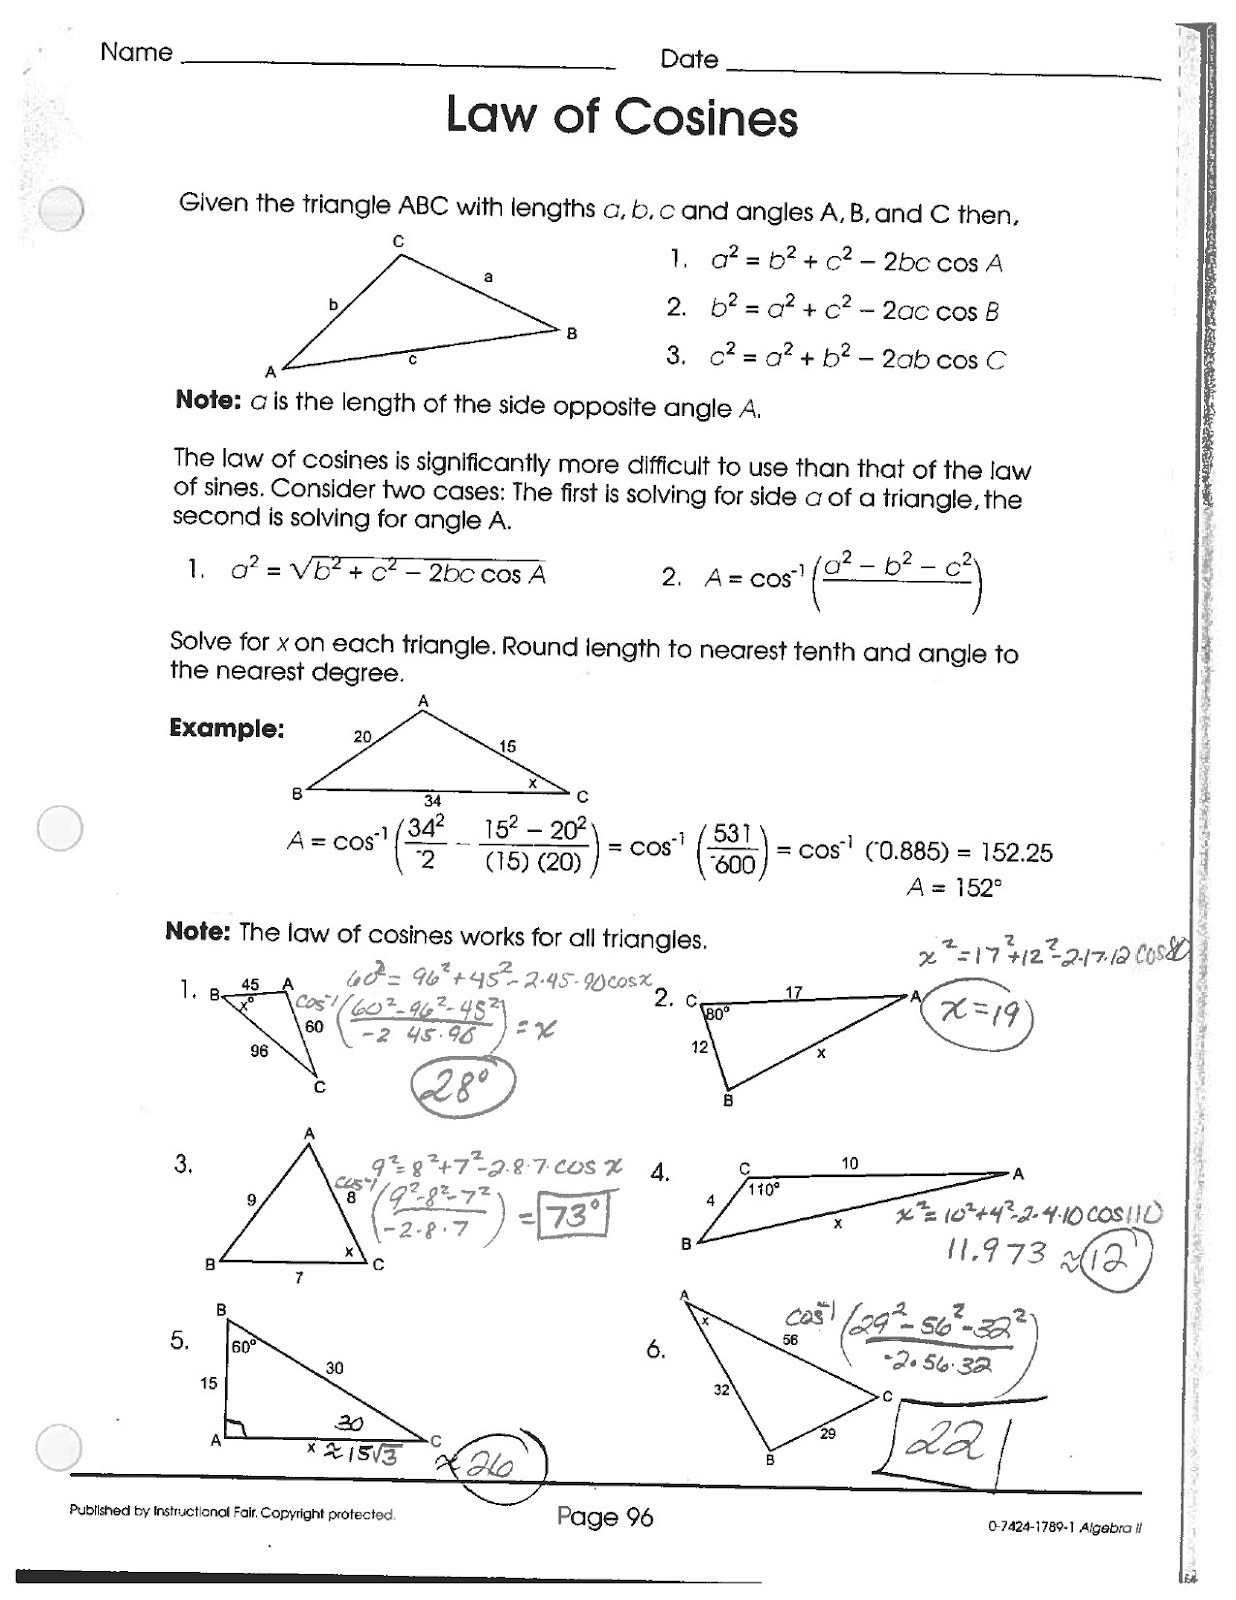 Law Of Sines Worksheet Answers Math Classes Spring 2012 2012